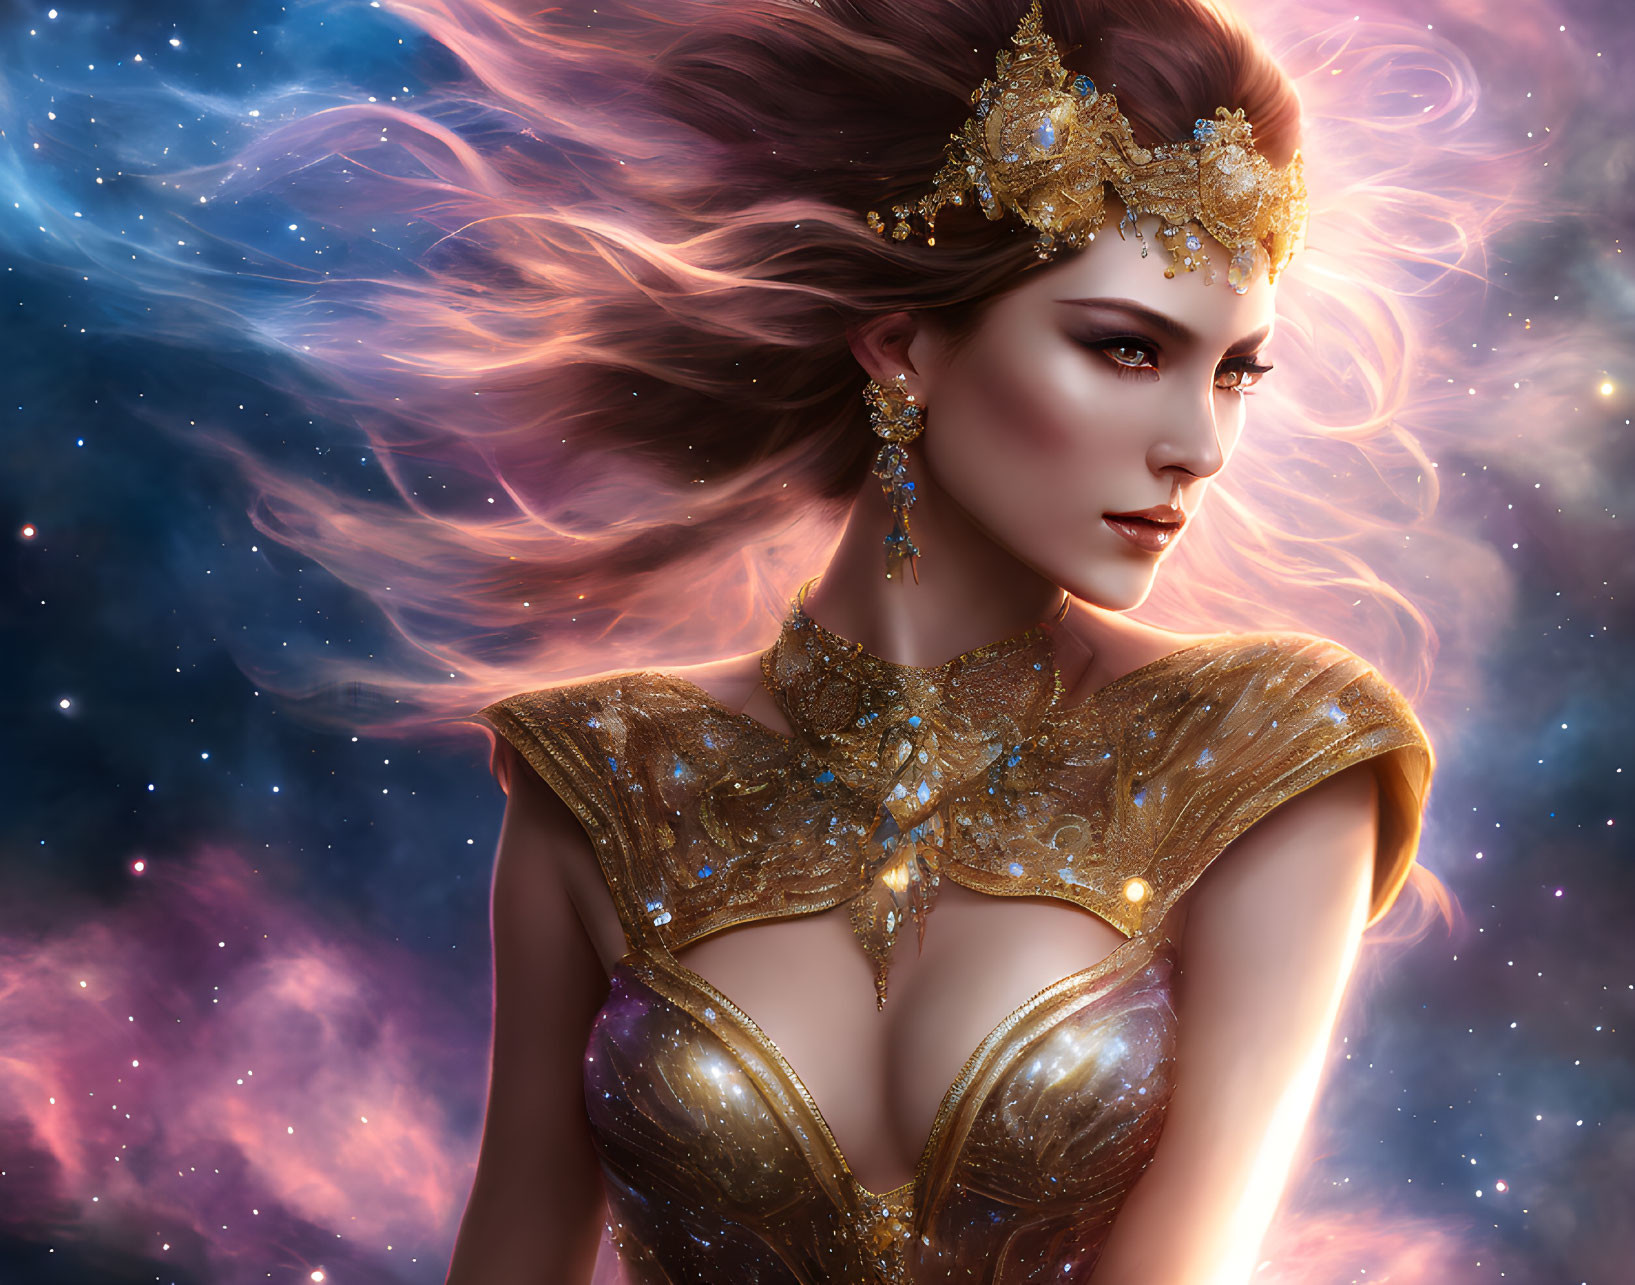 Illustrated woman adorned with golden jewelry in cosmic setting